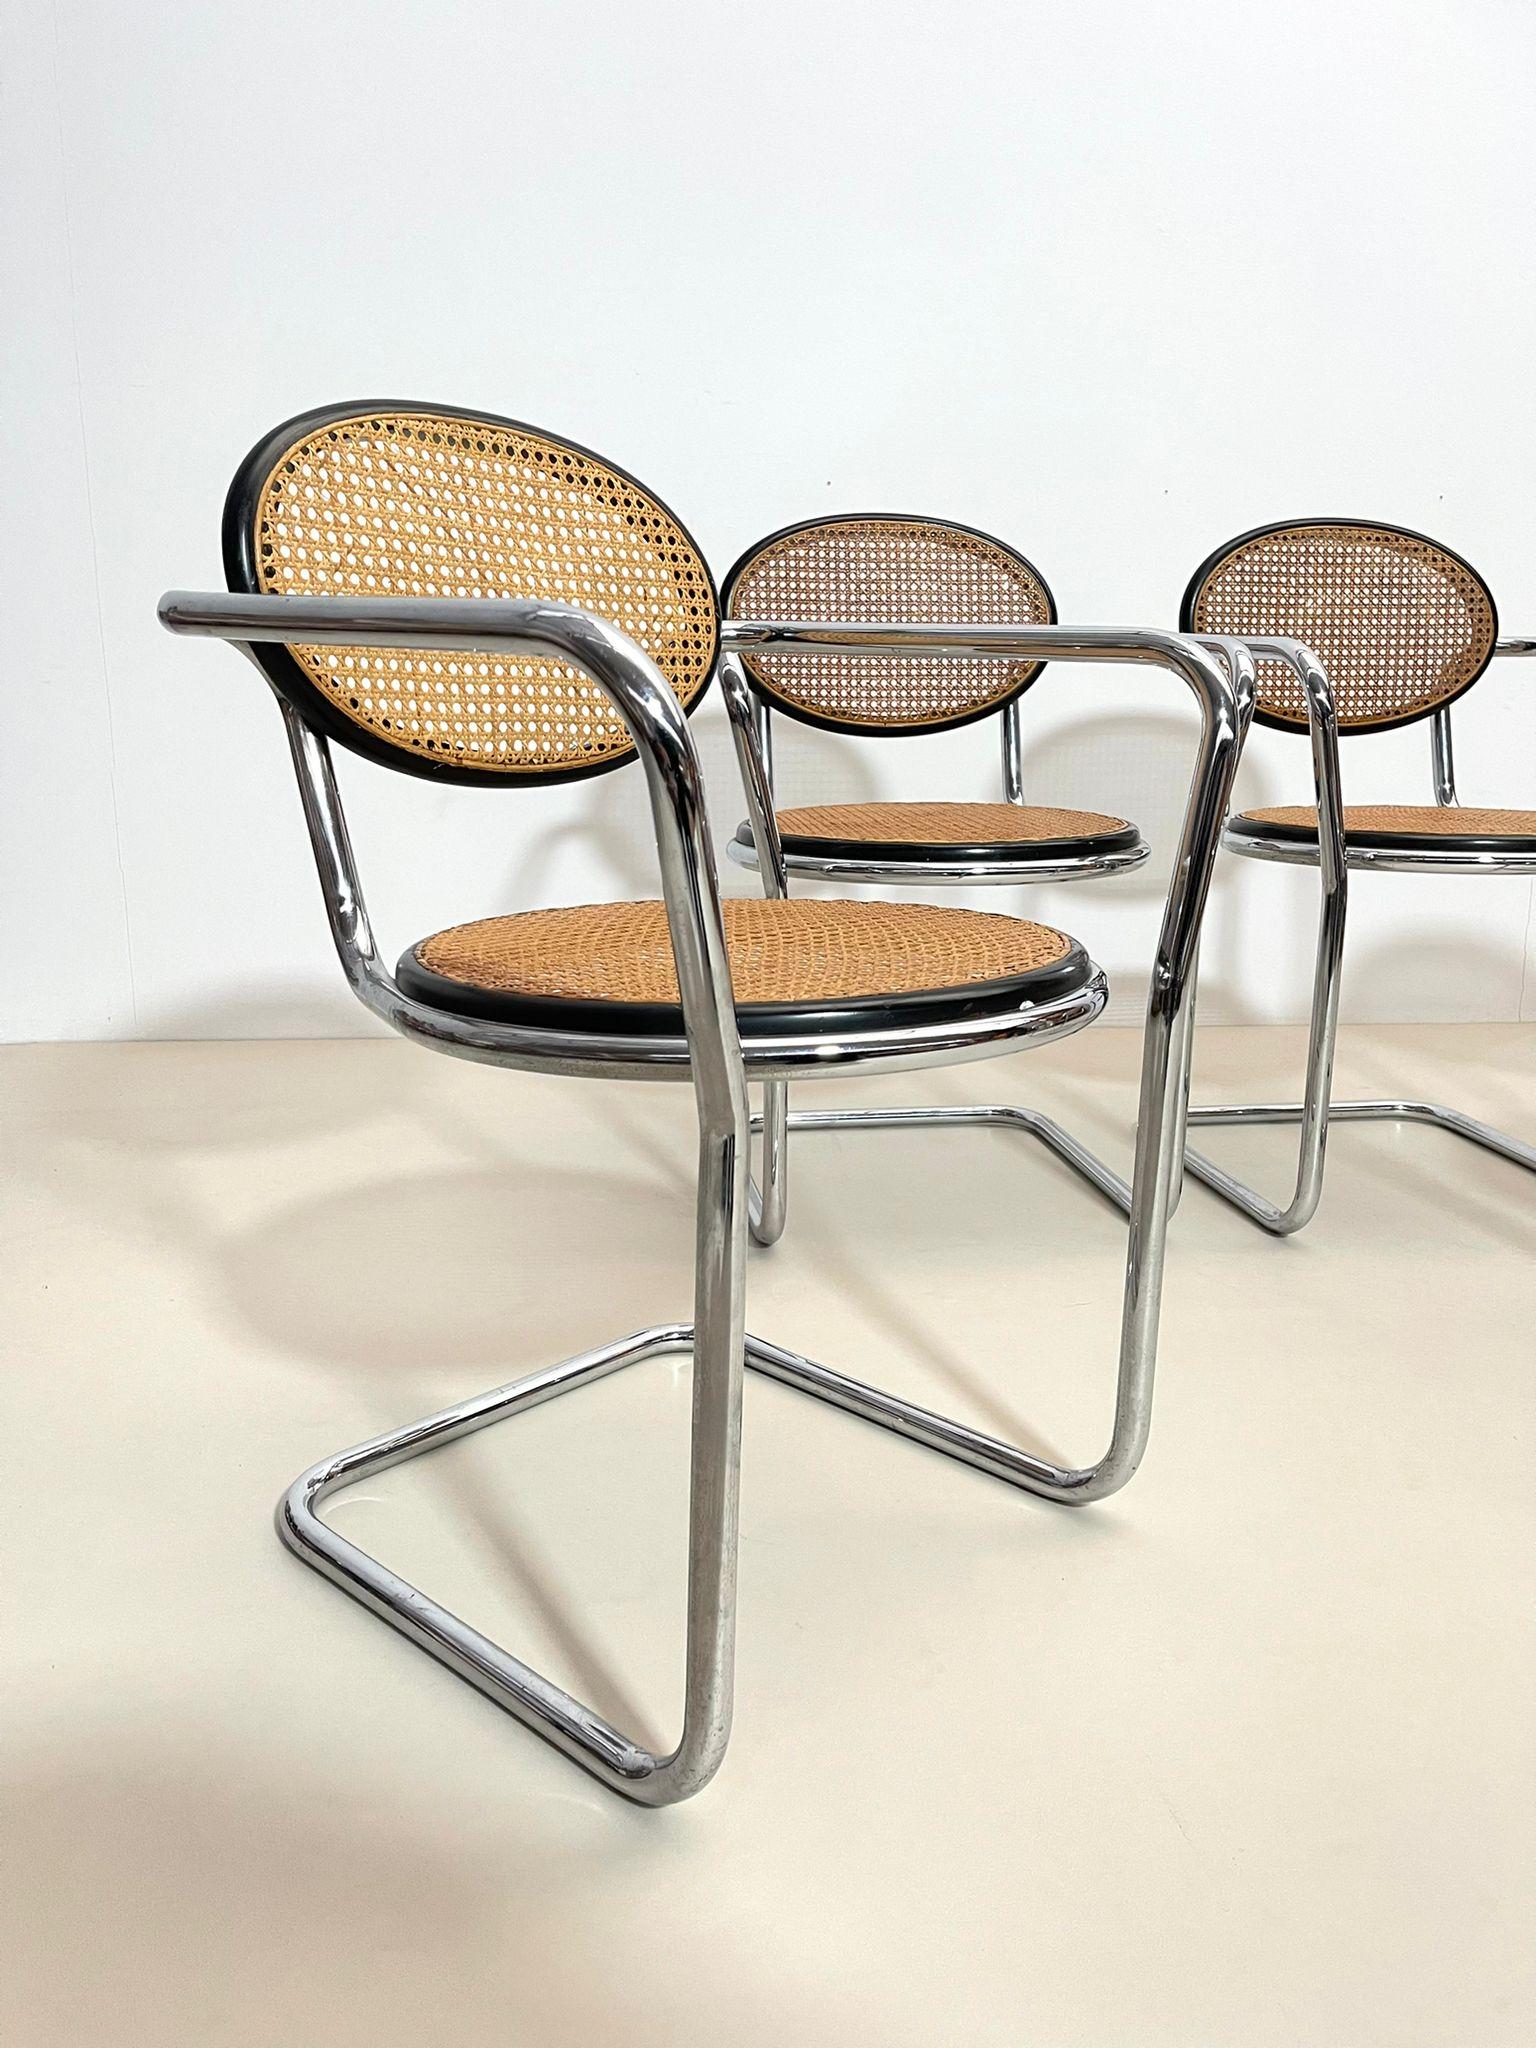 Mid-Century Modern set of 4 armchairs Marcel Breuer style, cane and chrome, 1970s.